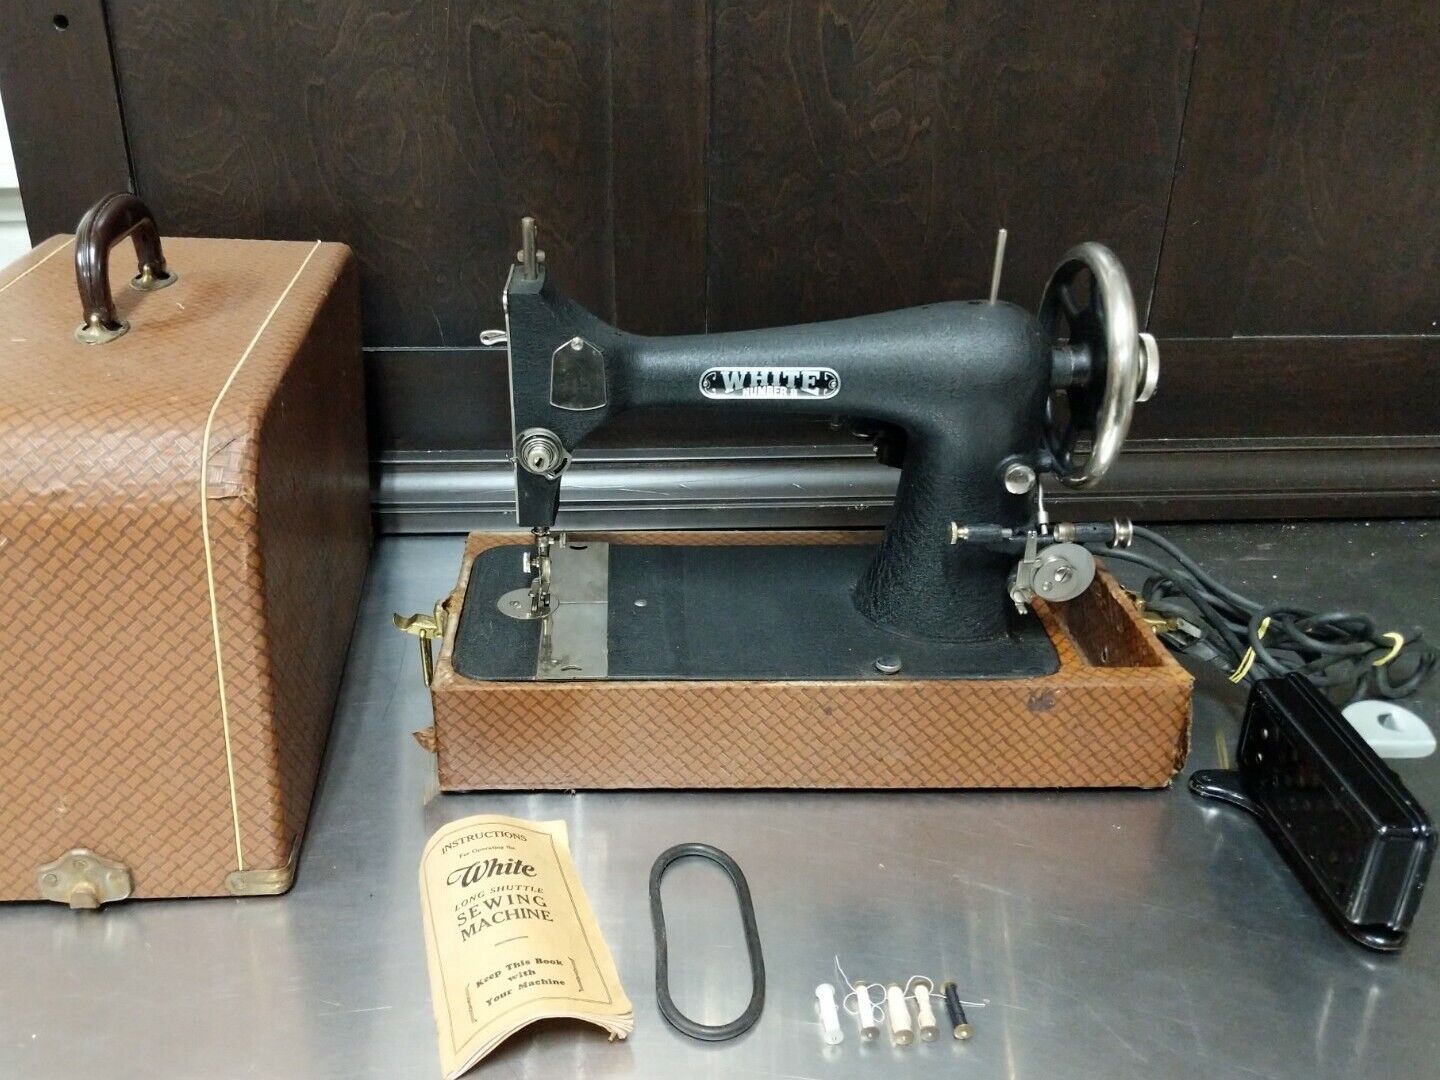 WHITE Long Shuttle Sewing Machine and Case. E-6354. Excellent Vintage. 